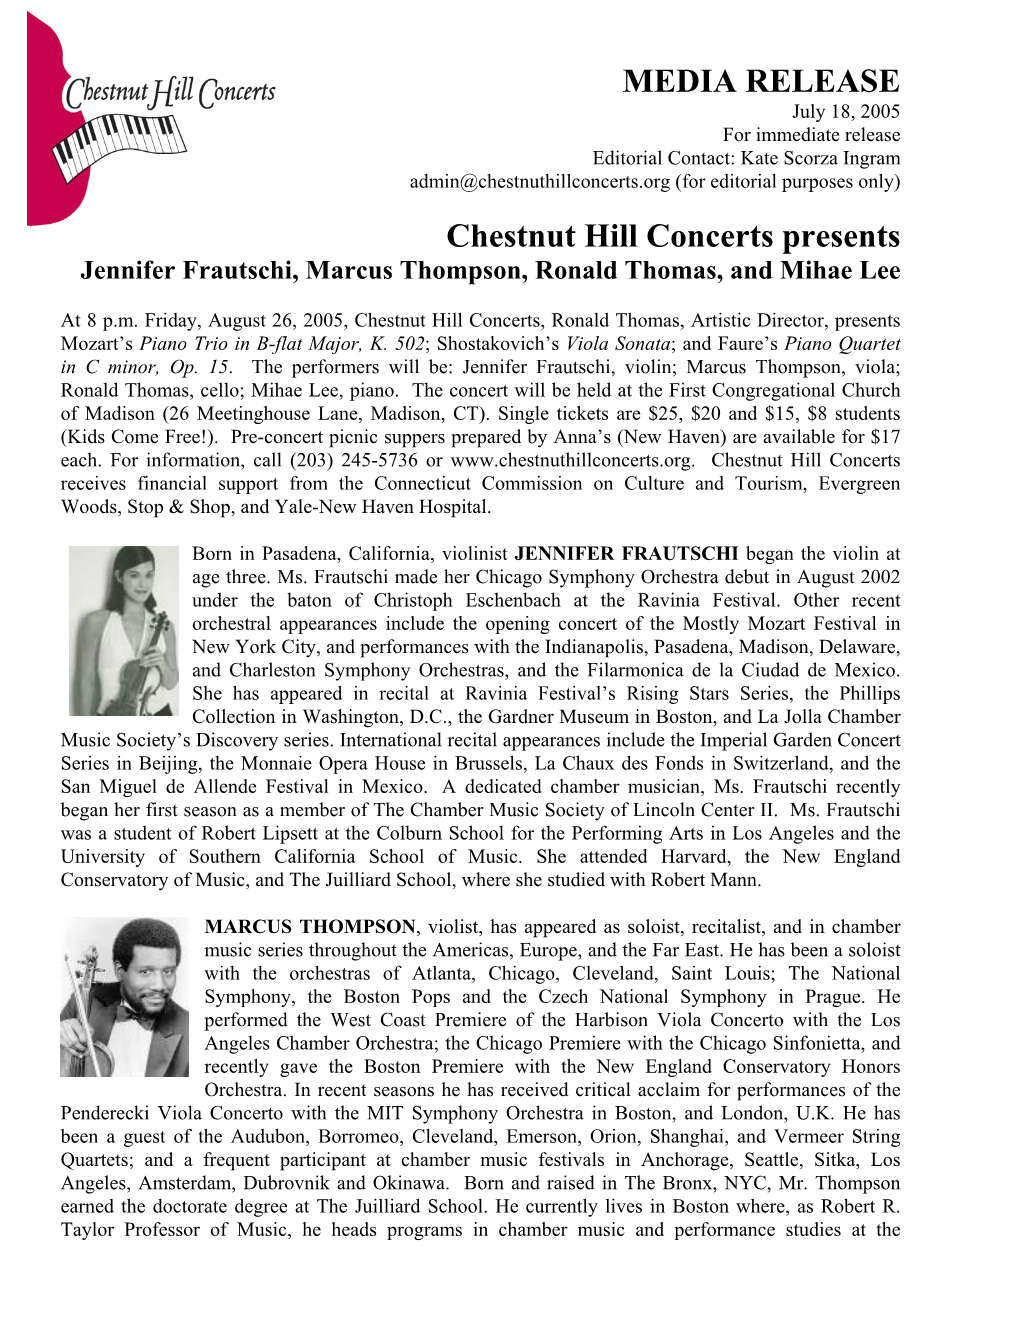 MEDIA RELEASE July 18, 2005 for Immediate Release Editorial Contact: Kate Scorza Ingram Admin@Chestnuthillconcerts.Org (For Editorial Purposes Only)